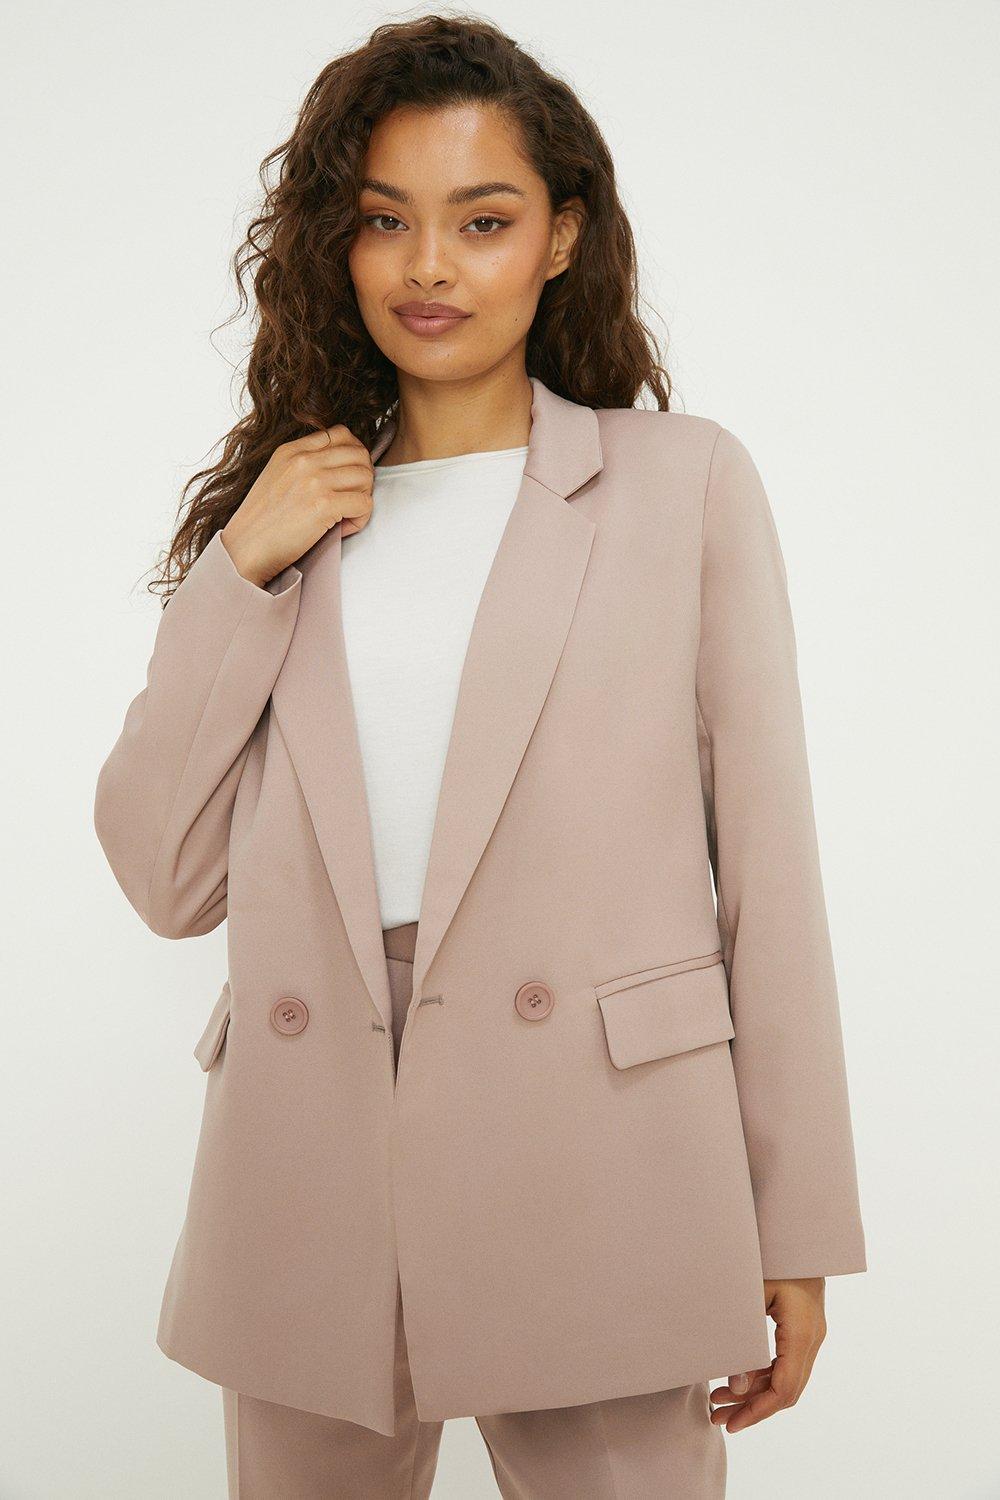 Women’s Petite Double Breasted Blazer - taupe - 8